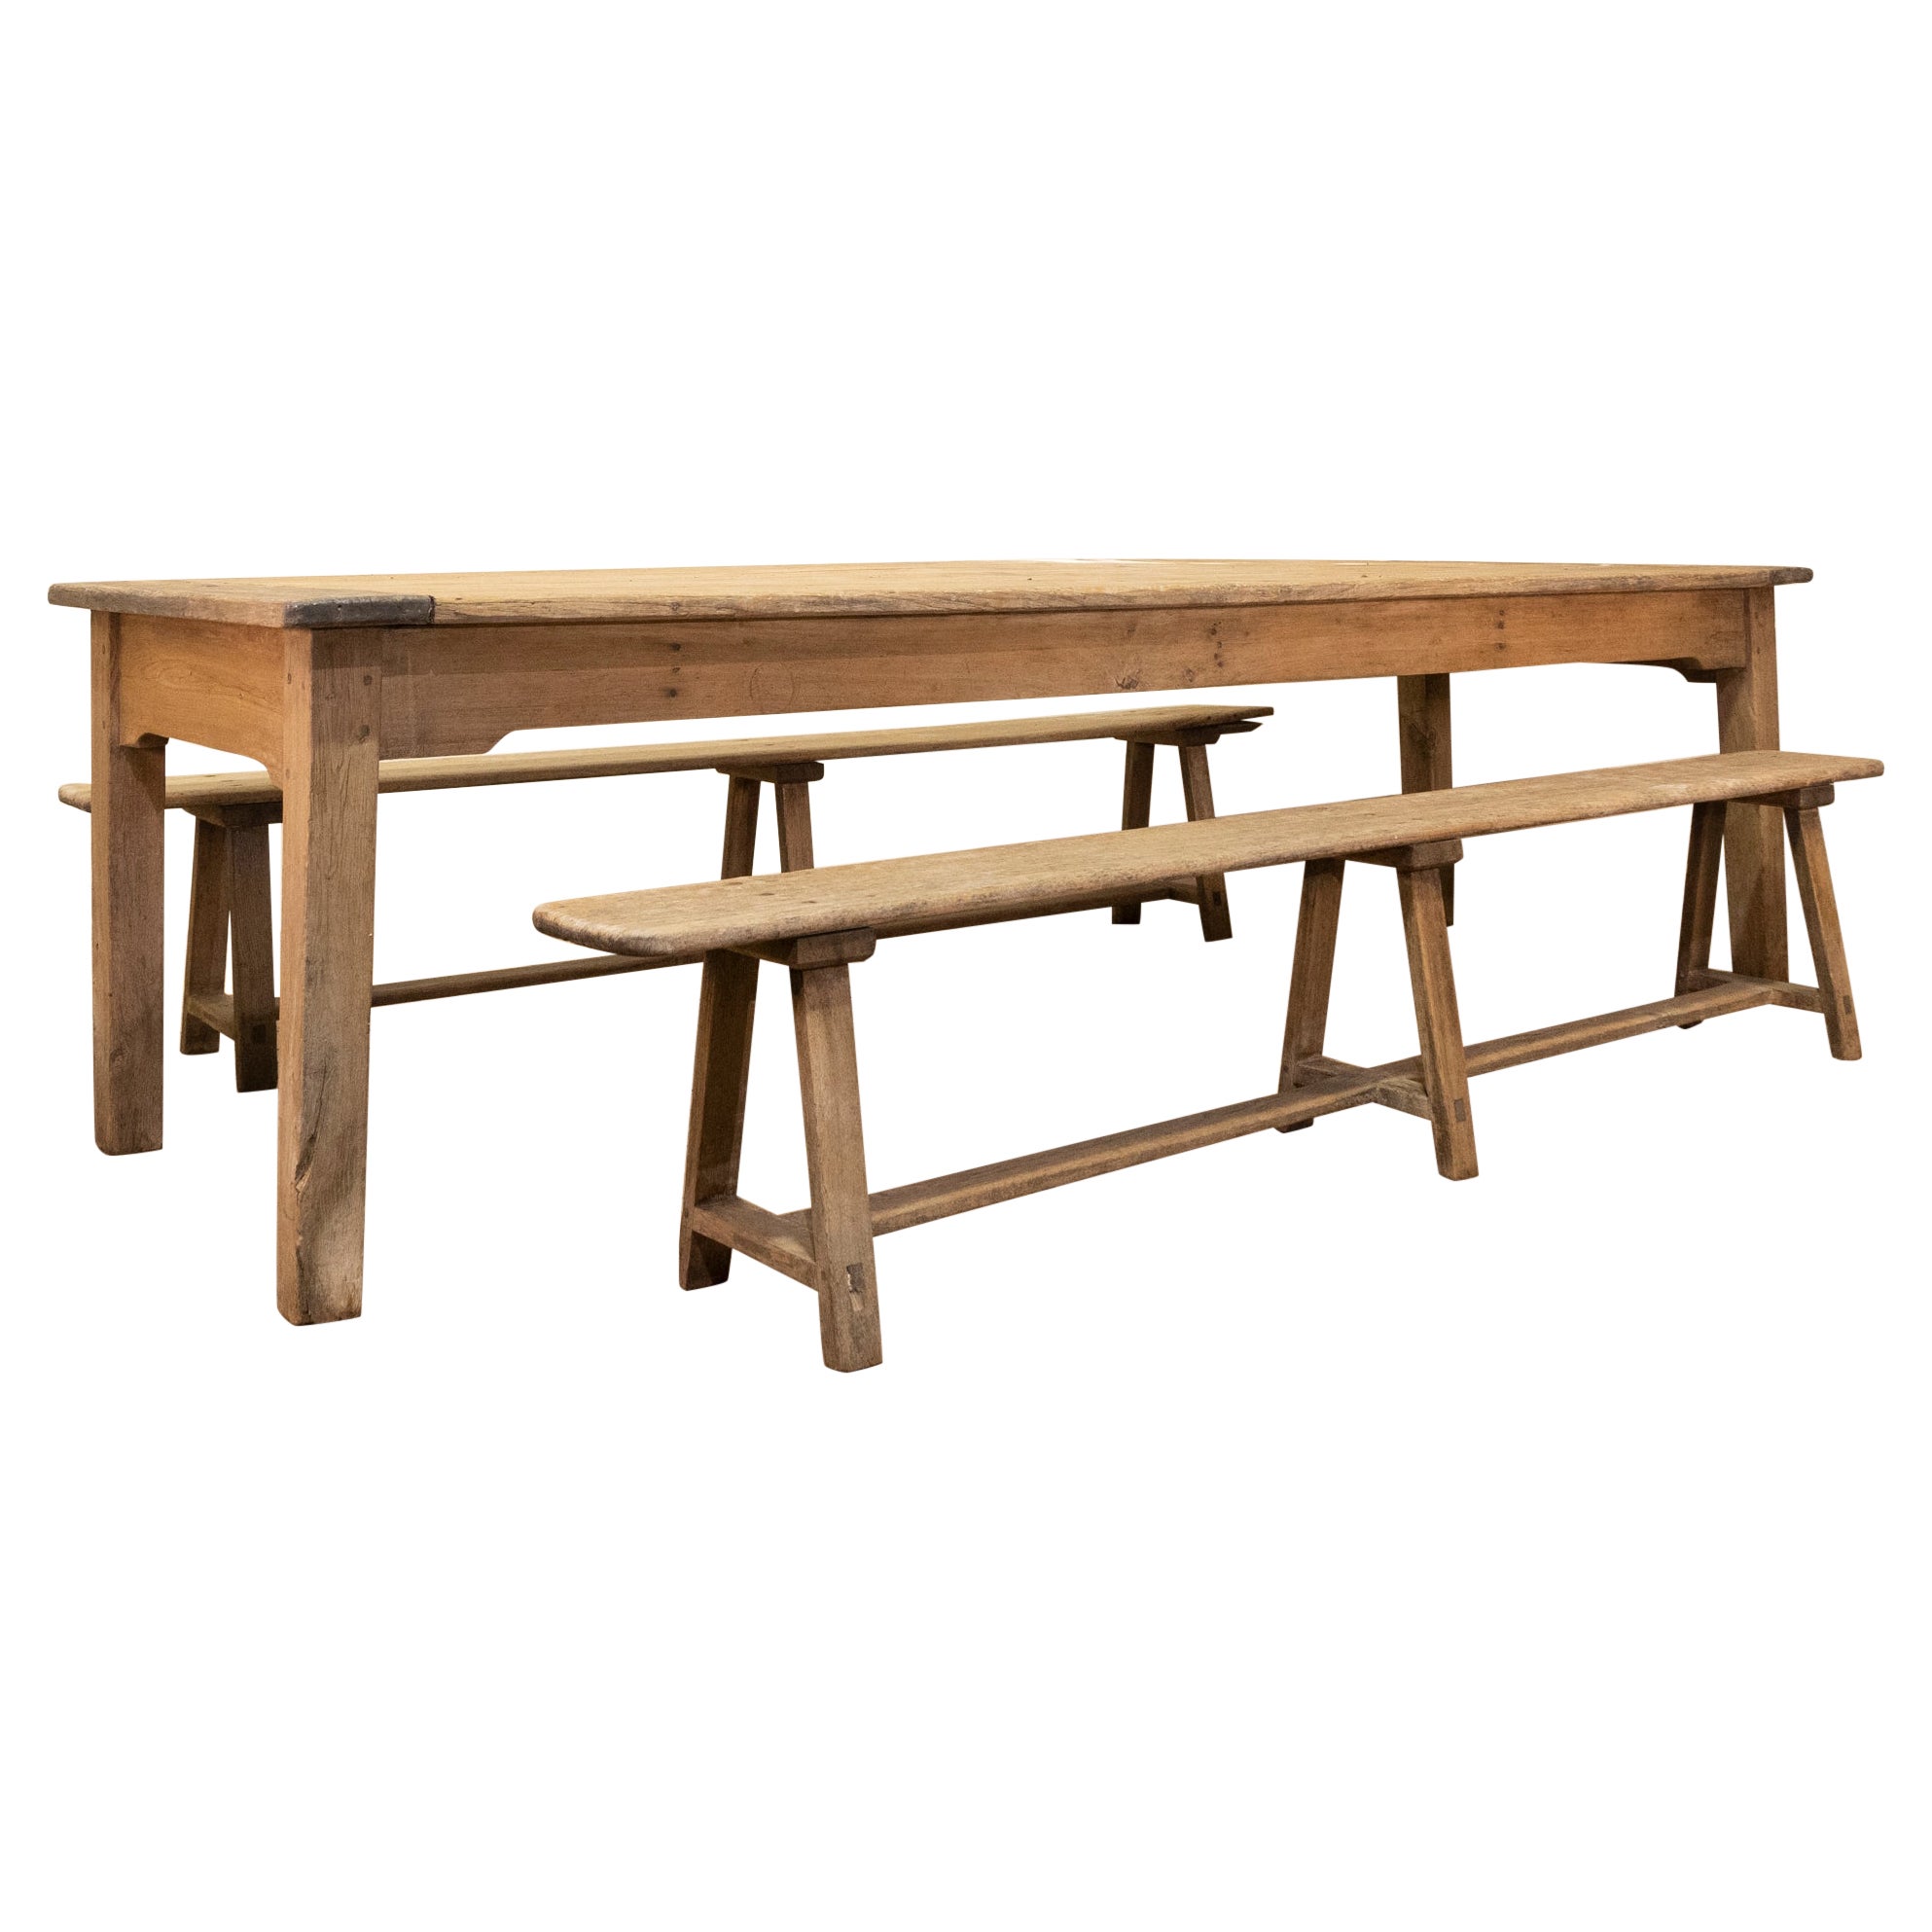 Large Scale 19th Century French Sycamore & Oak Farmhouse Table & Benches